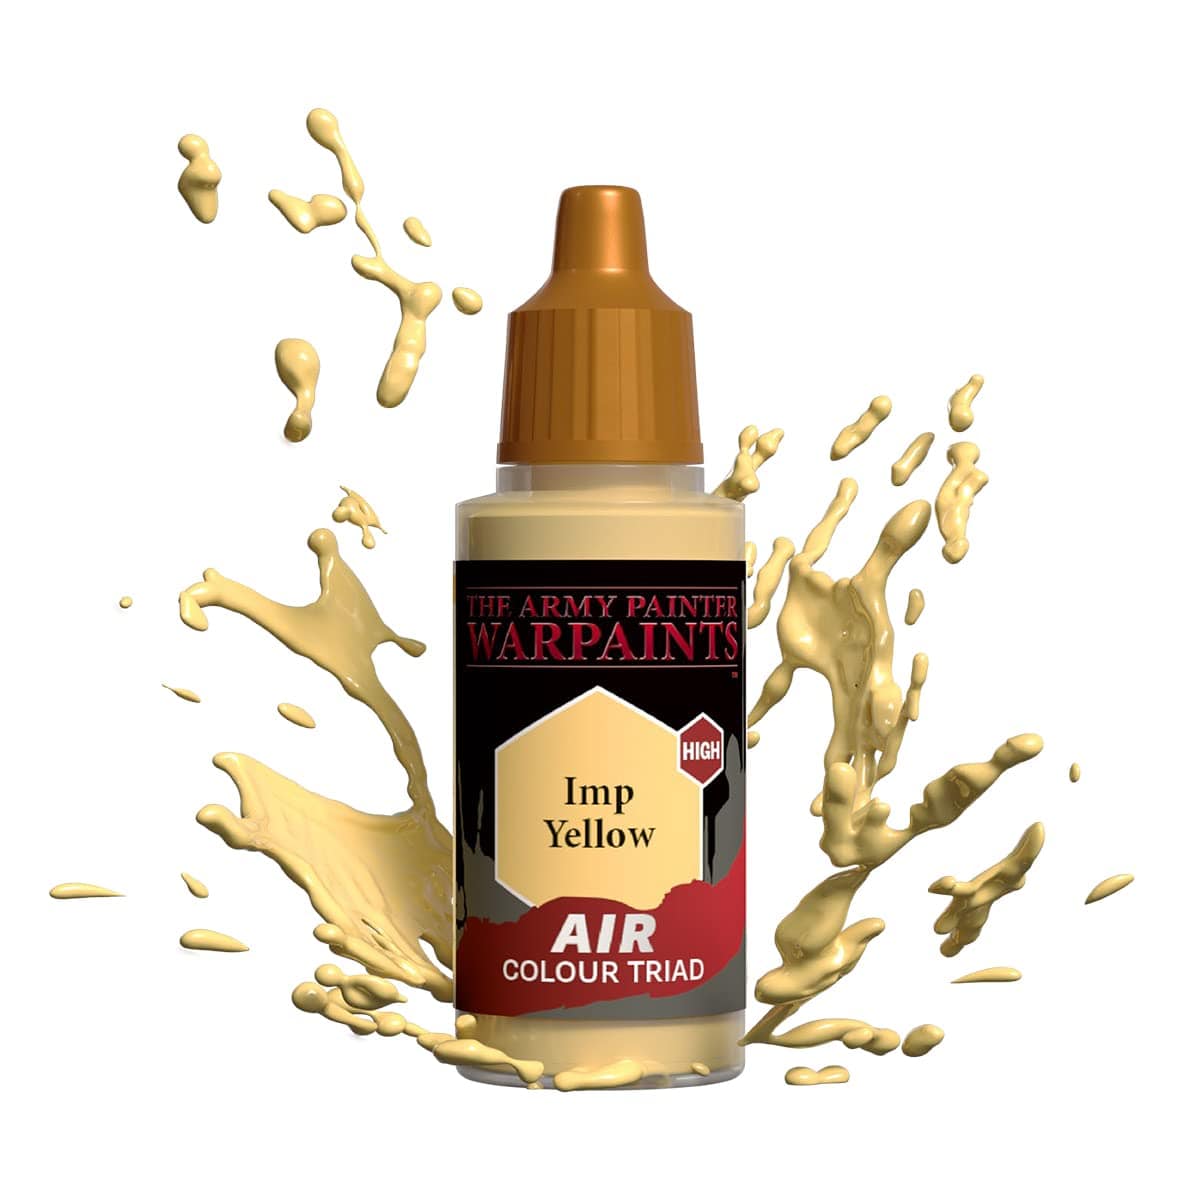 The Army Painter Accessories The Army Painter Warpaints Air: Imp Yellow 18ml